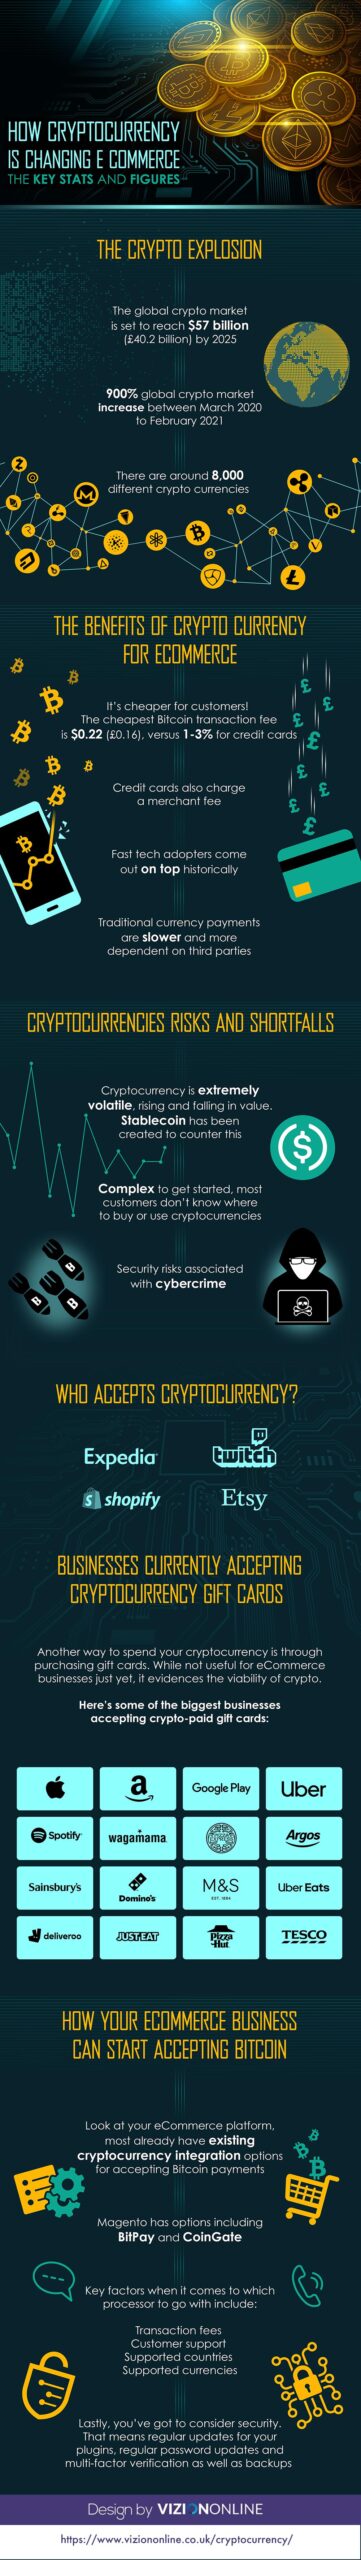 Infographic: How CRYPTOCURRENCY IS CHANGING E COMMERCE - Infographics King